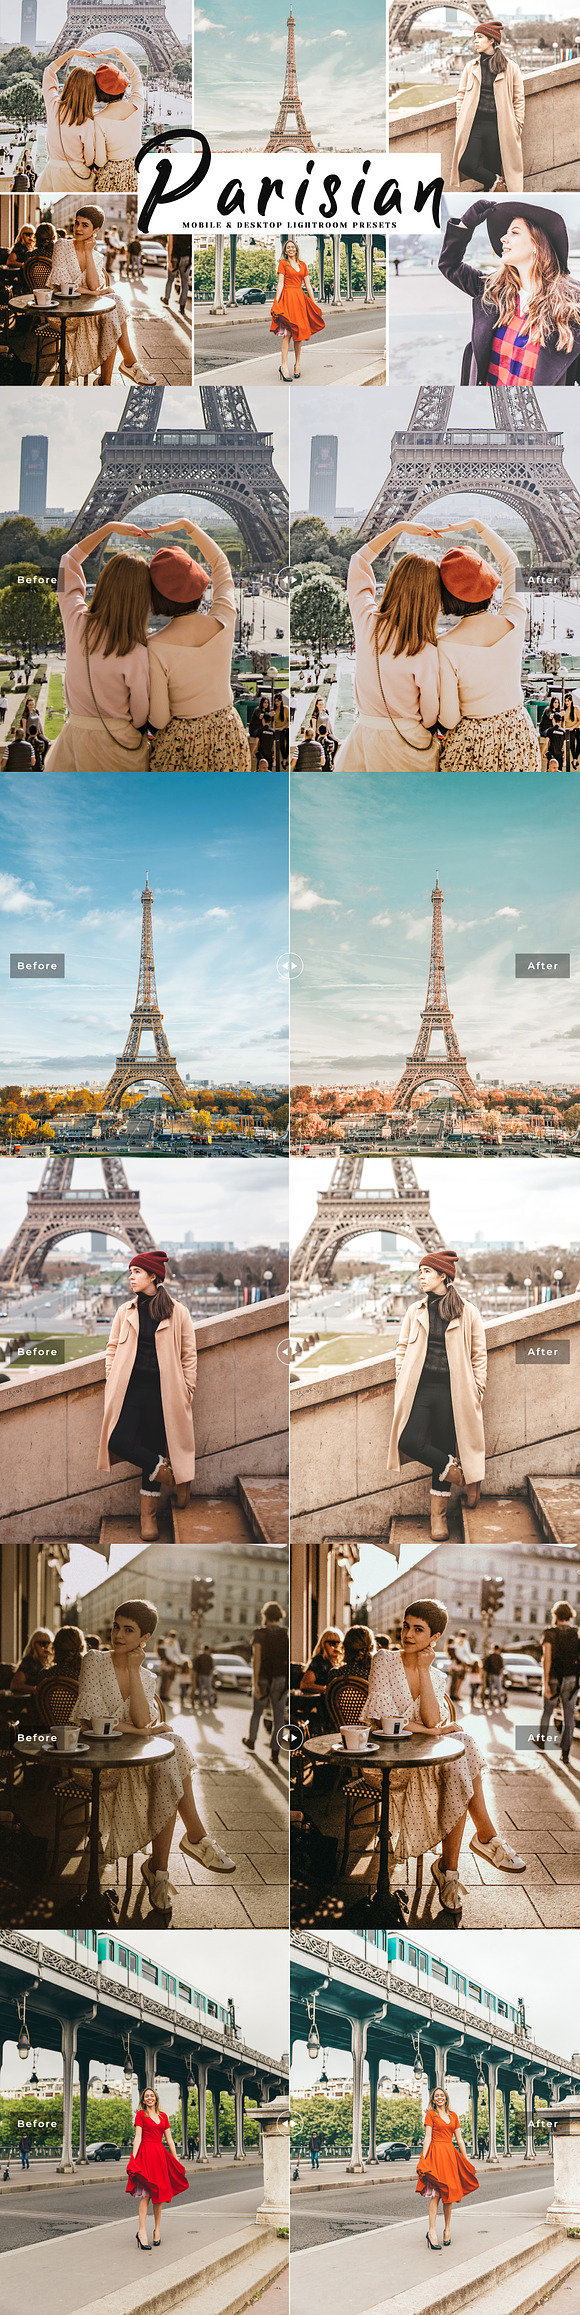 Parisian Lightroom Presets Pack in Add-Ons - product preview 5